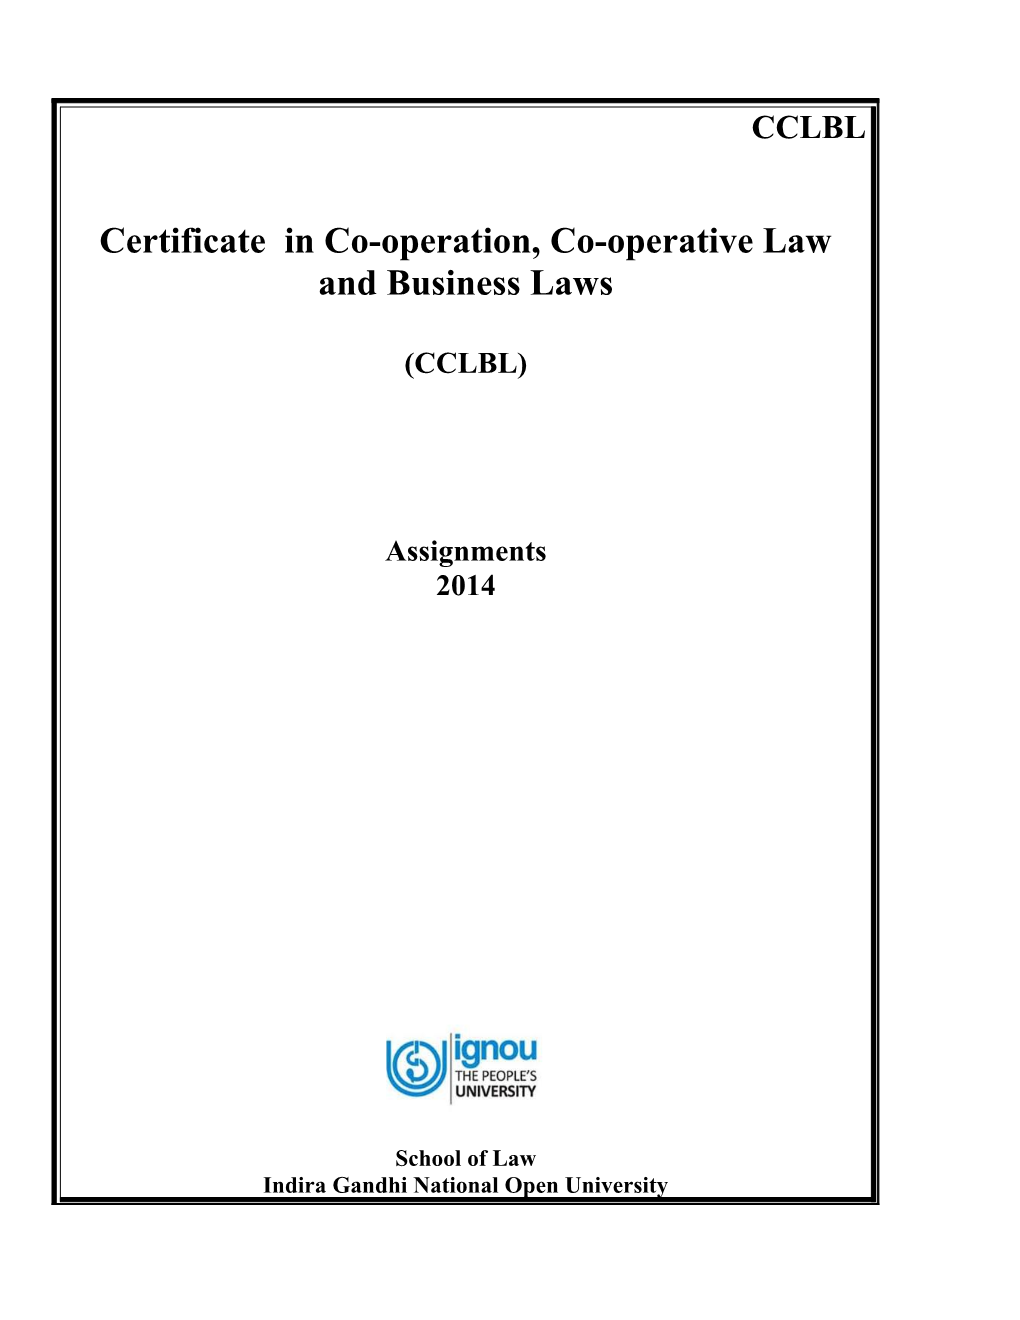 Certificate in Co-Operation, Co-Operative Law and Business Laws